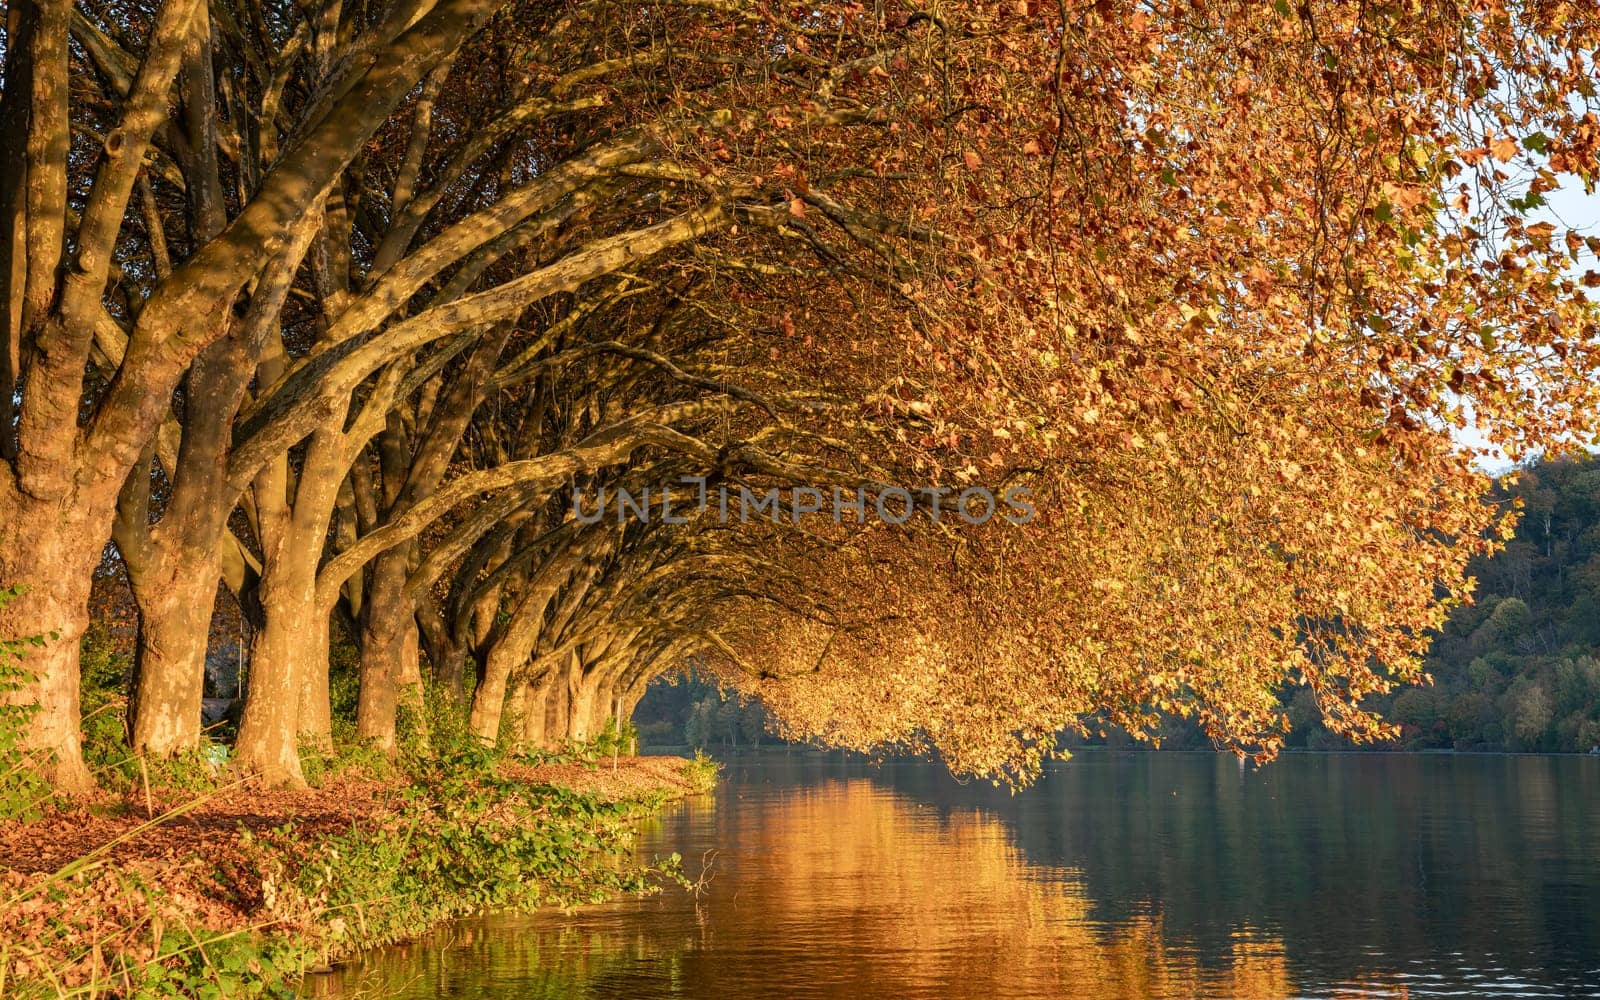 Famous plane trees in autumnal colors on the lakefront of Baldeney lake, Essen, Germany